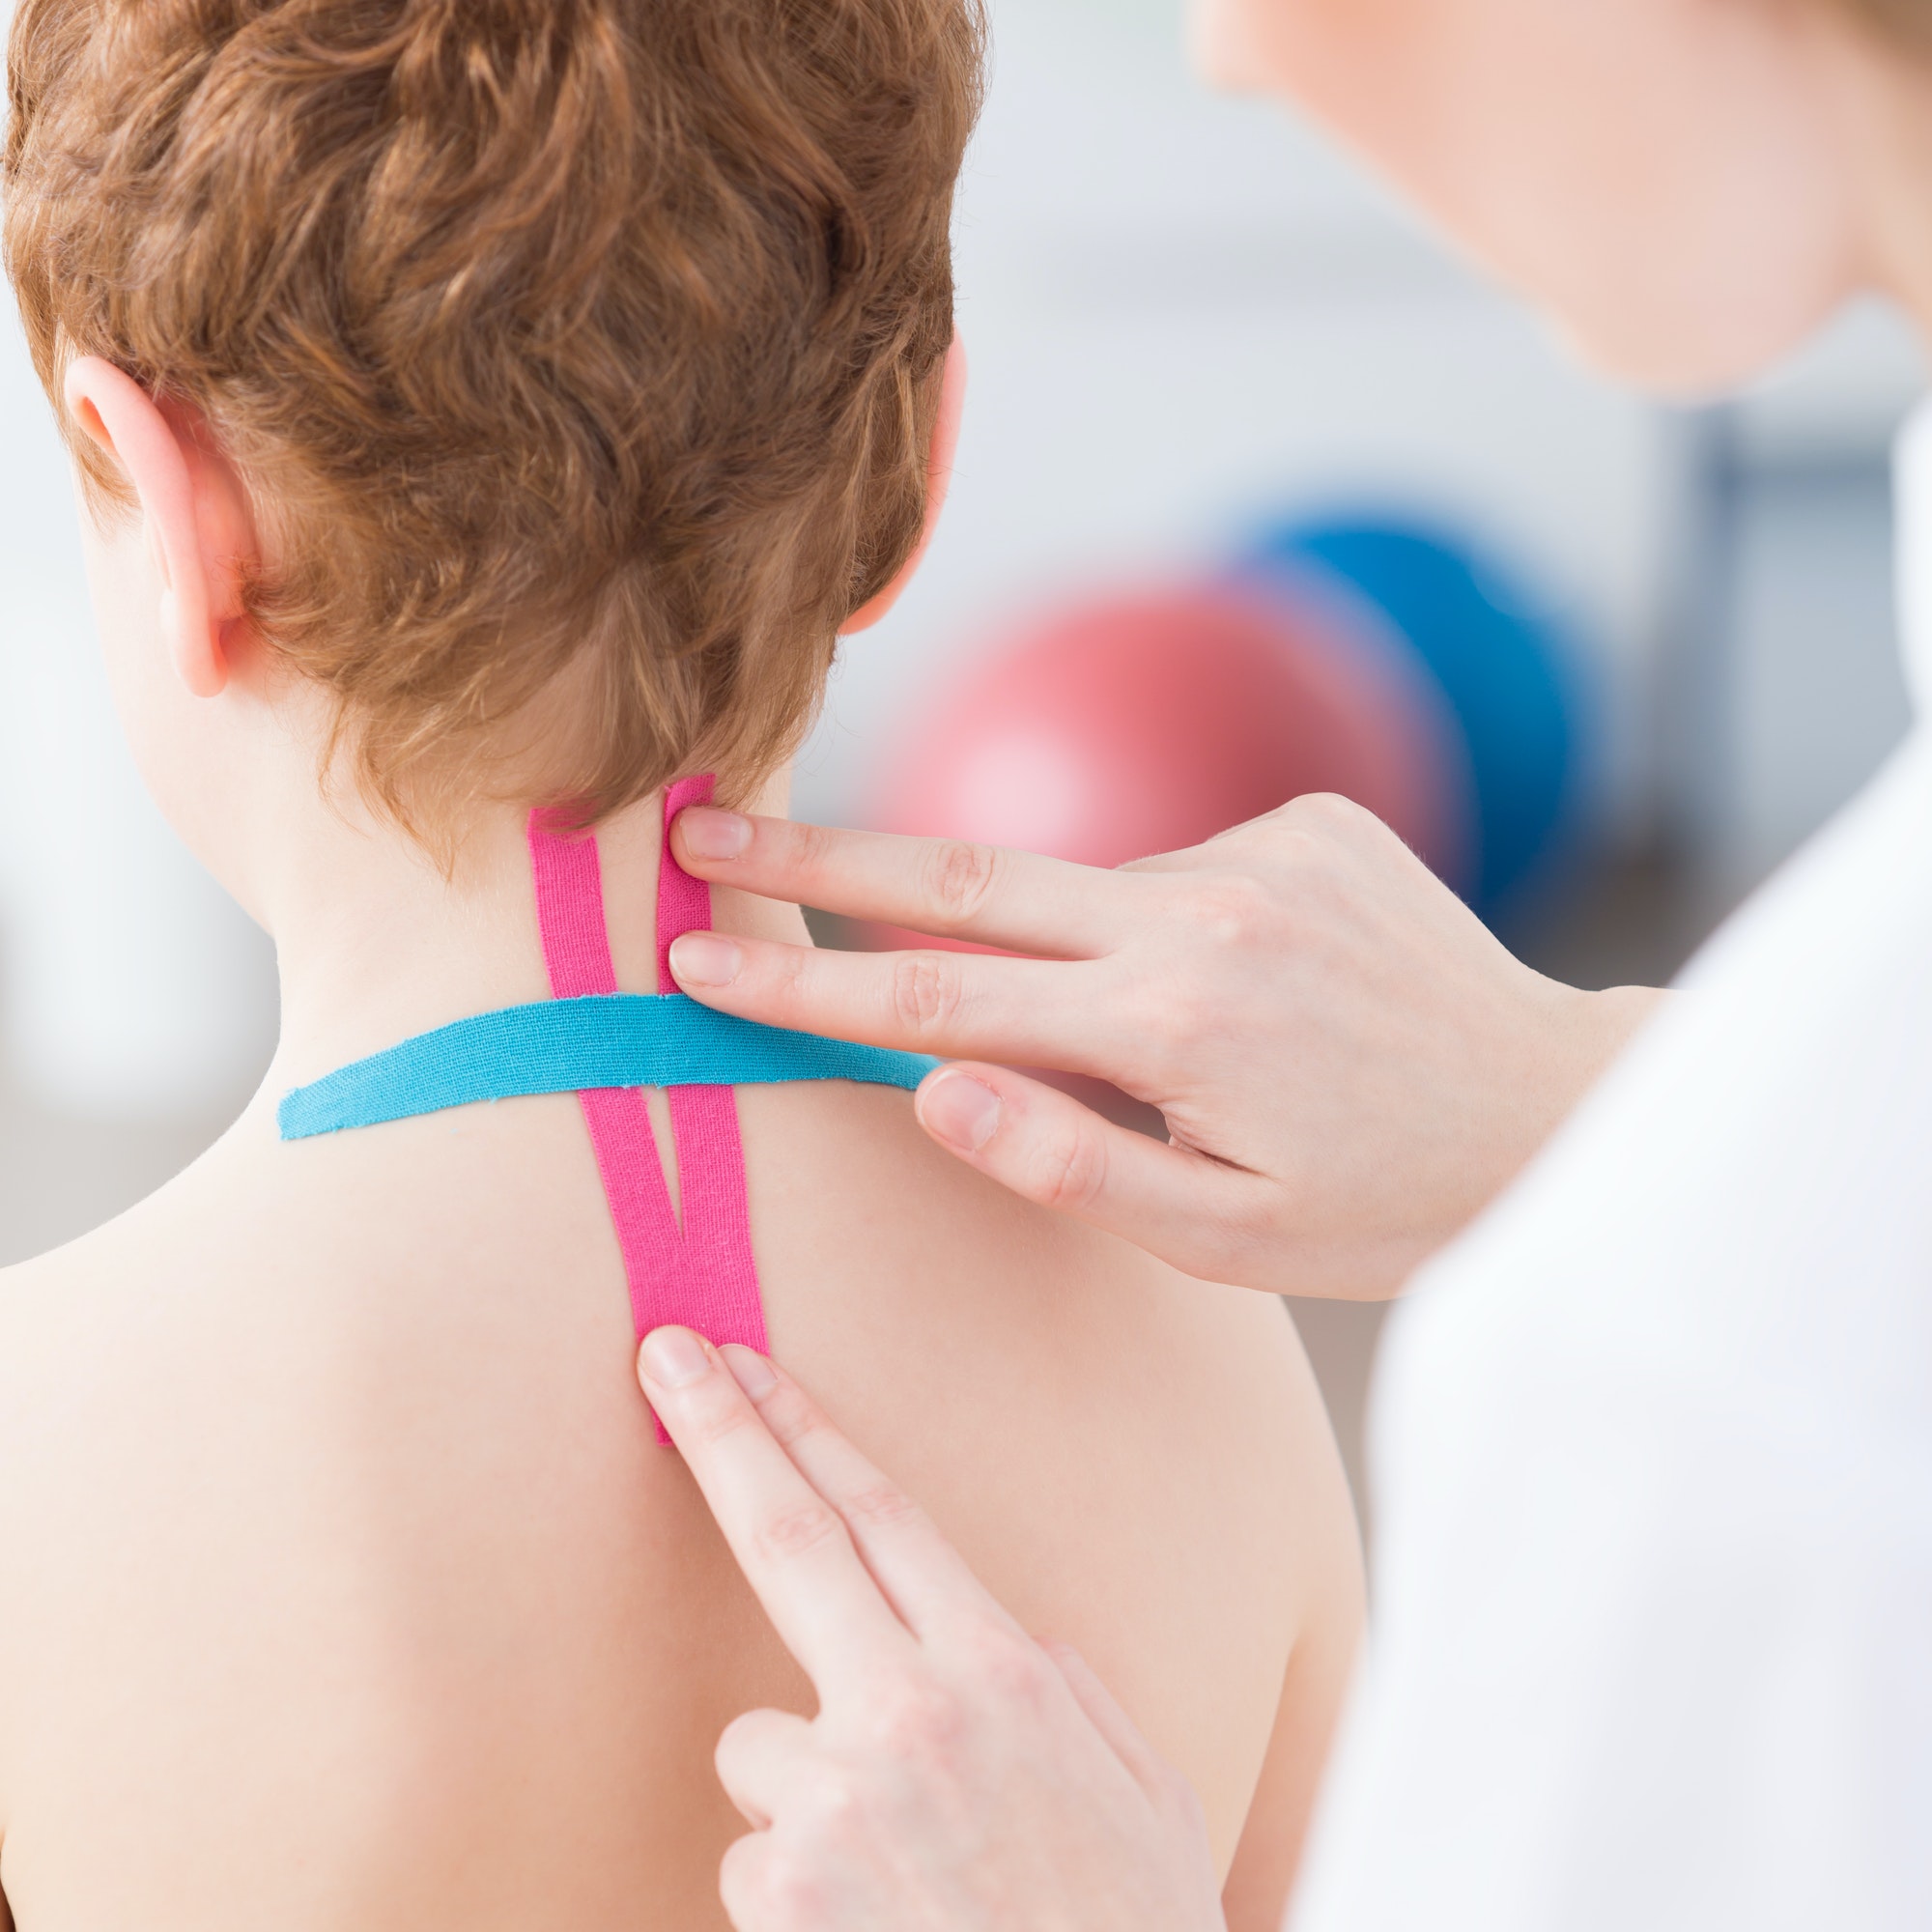 Physiotherapist applying kinesiology tapes